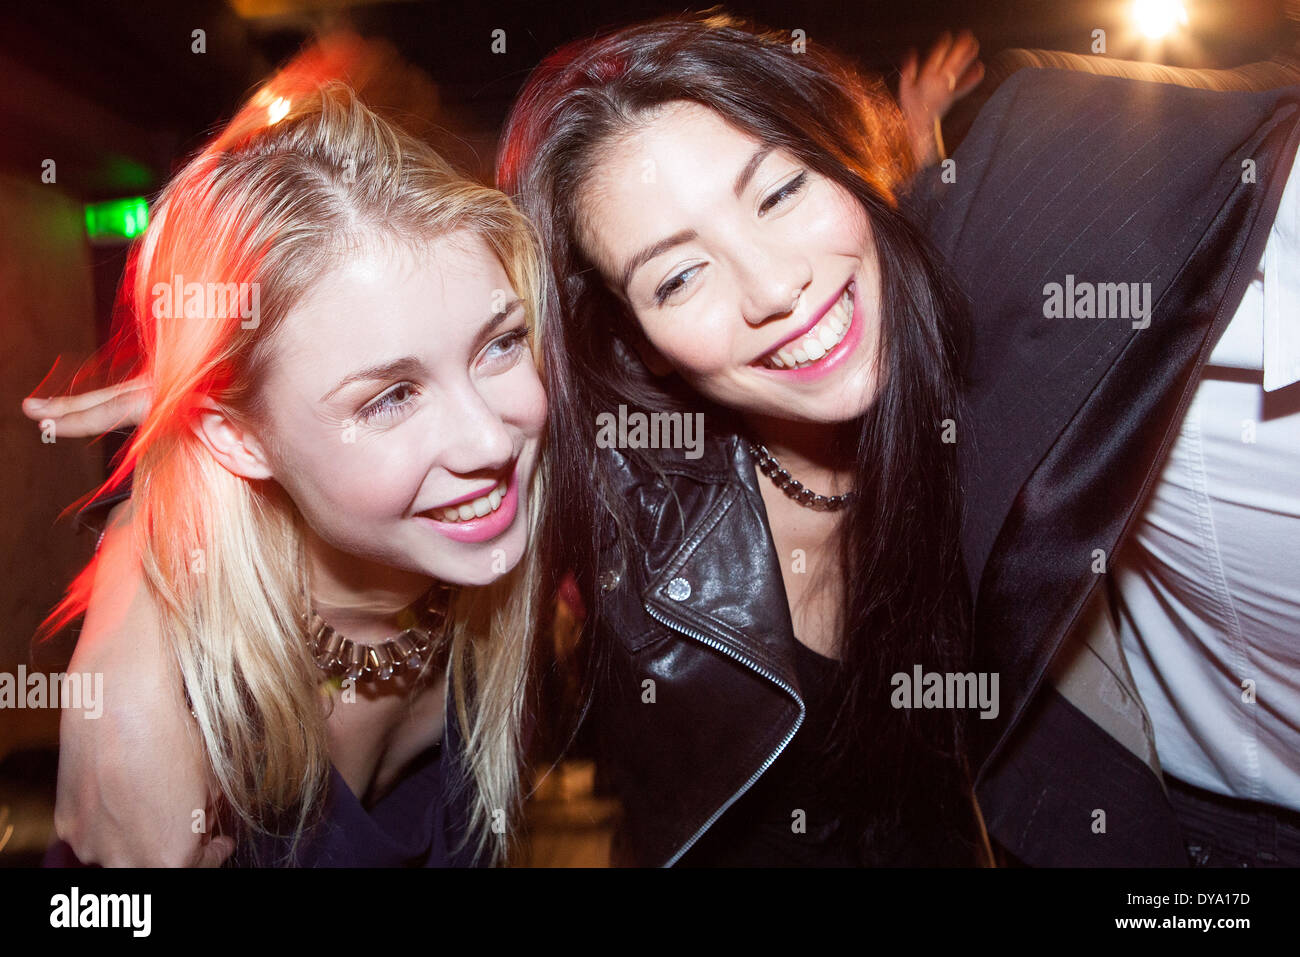 Friends out at night having fun Stock Photo